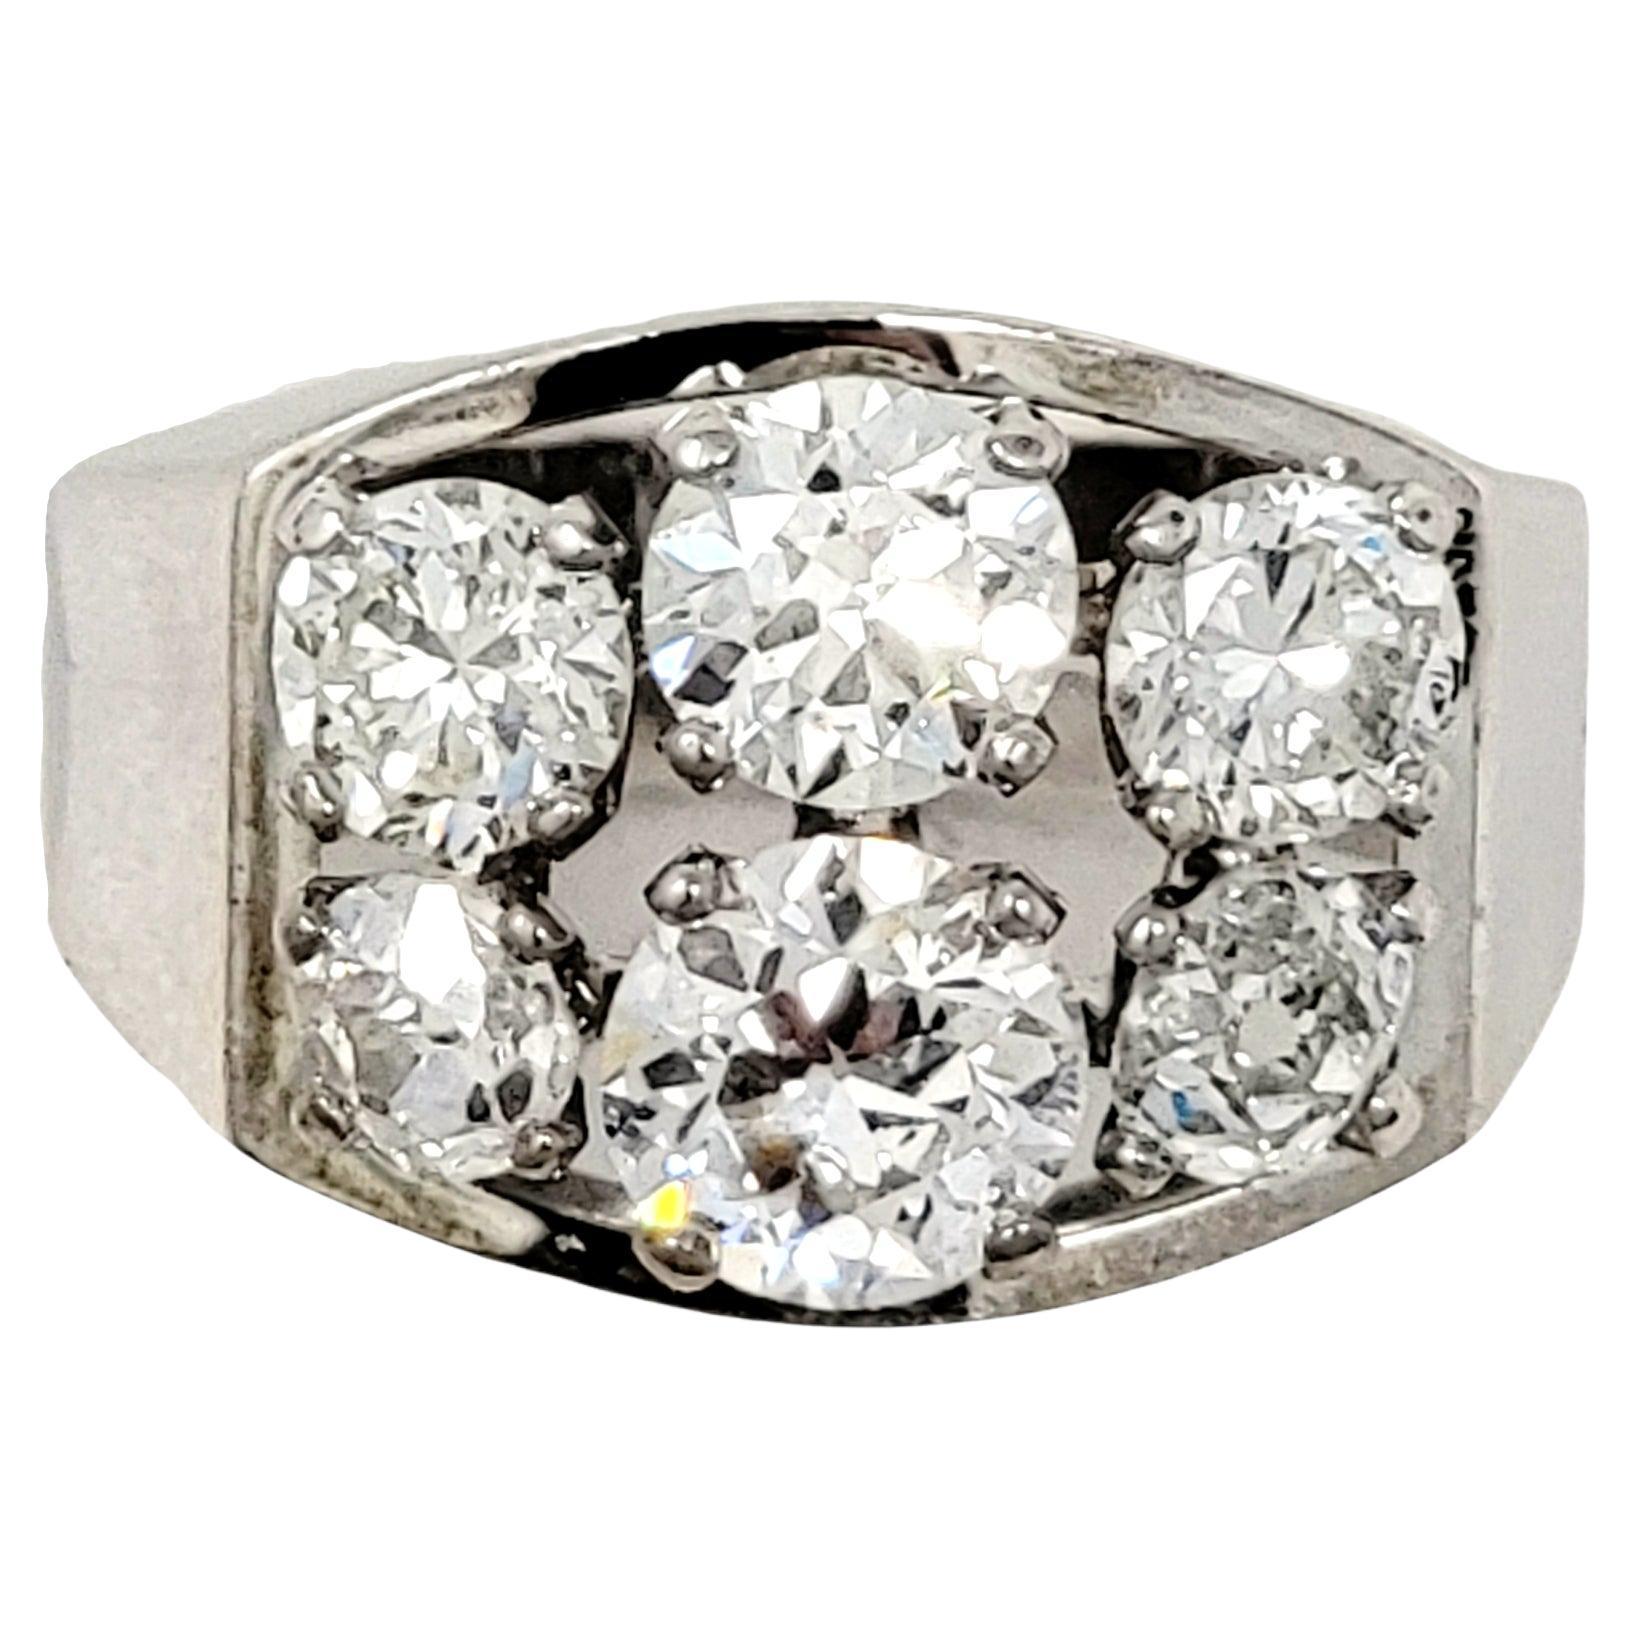 2.75 Carats Total Mixed Cut Round 6 Diamond Band Ring in 18 Karat White Gold For Sale